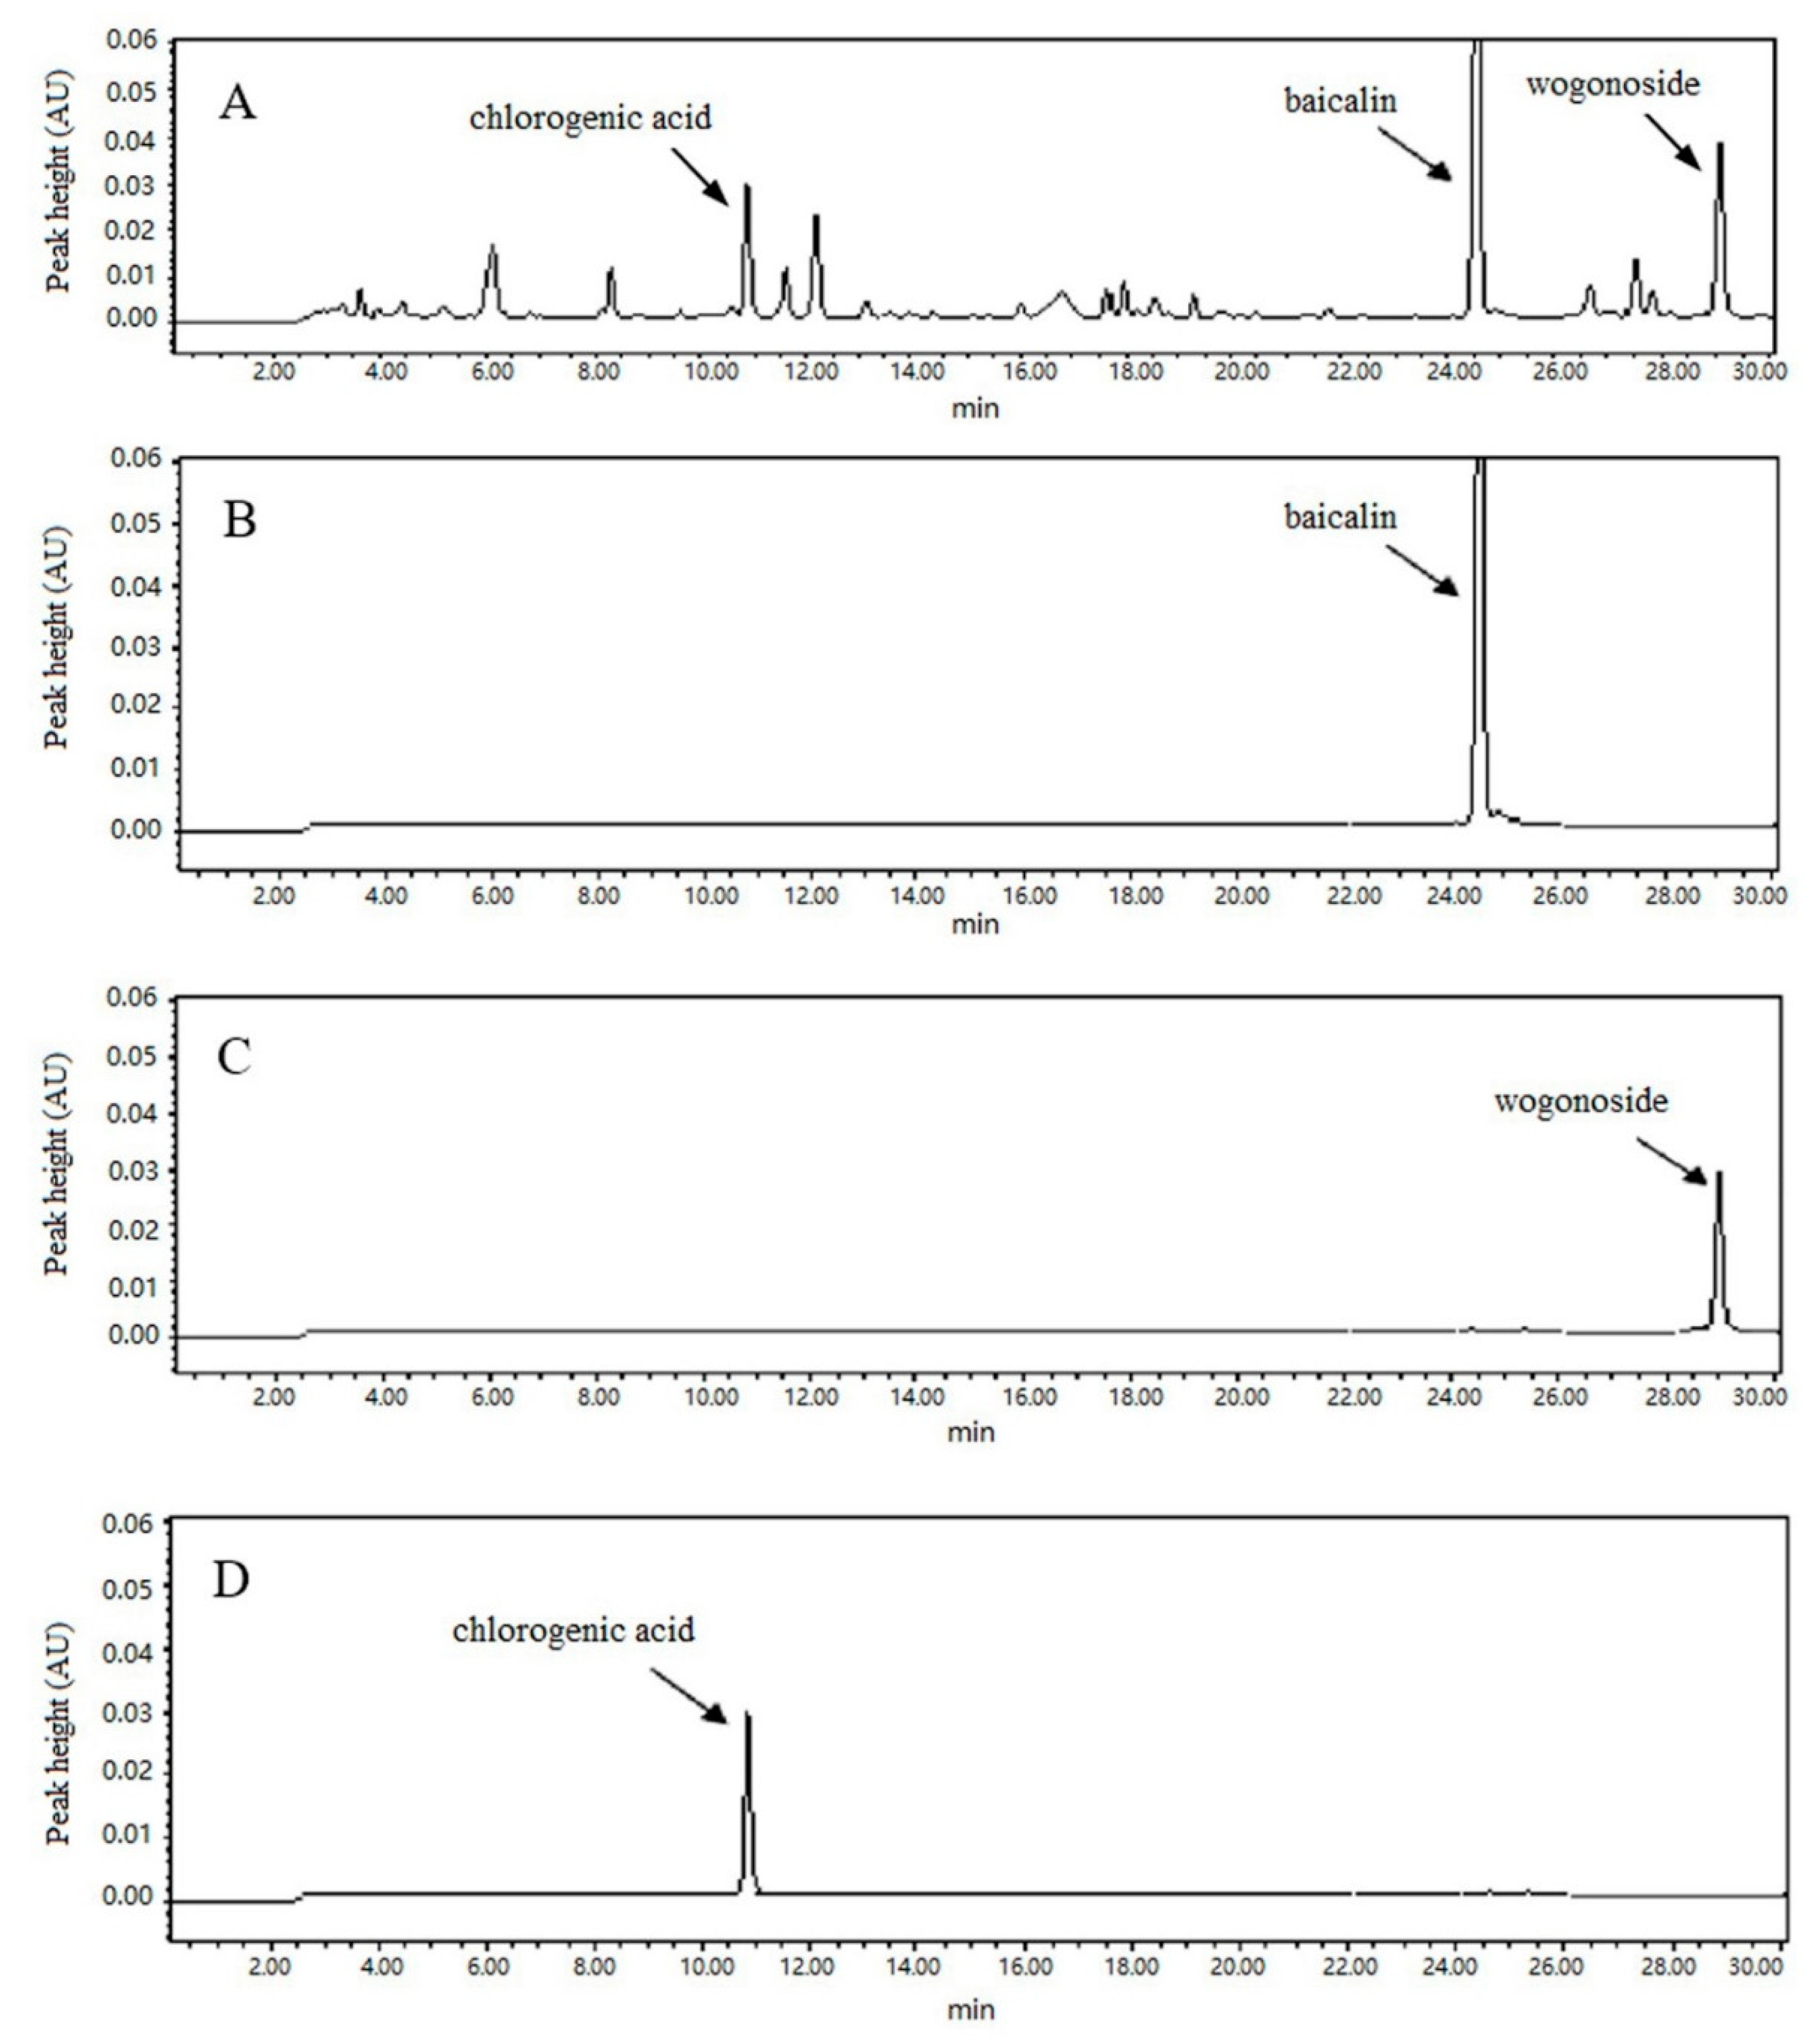 Processes Free Full Text Optimization Of Baicalin Wogonoside And Chlorogenic Acid Water Extraction Process From The Roots Of Scutellariae Radix And Lonicerae Japonicae Flos Using Response Surface Methodology Rsm Html